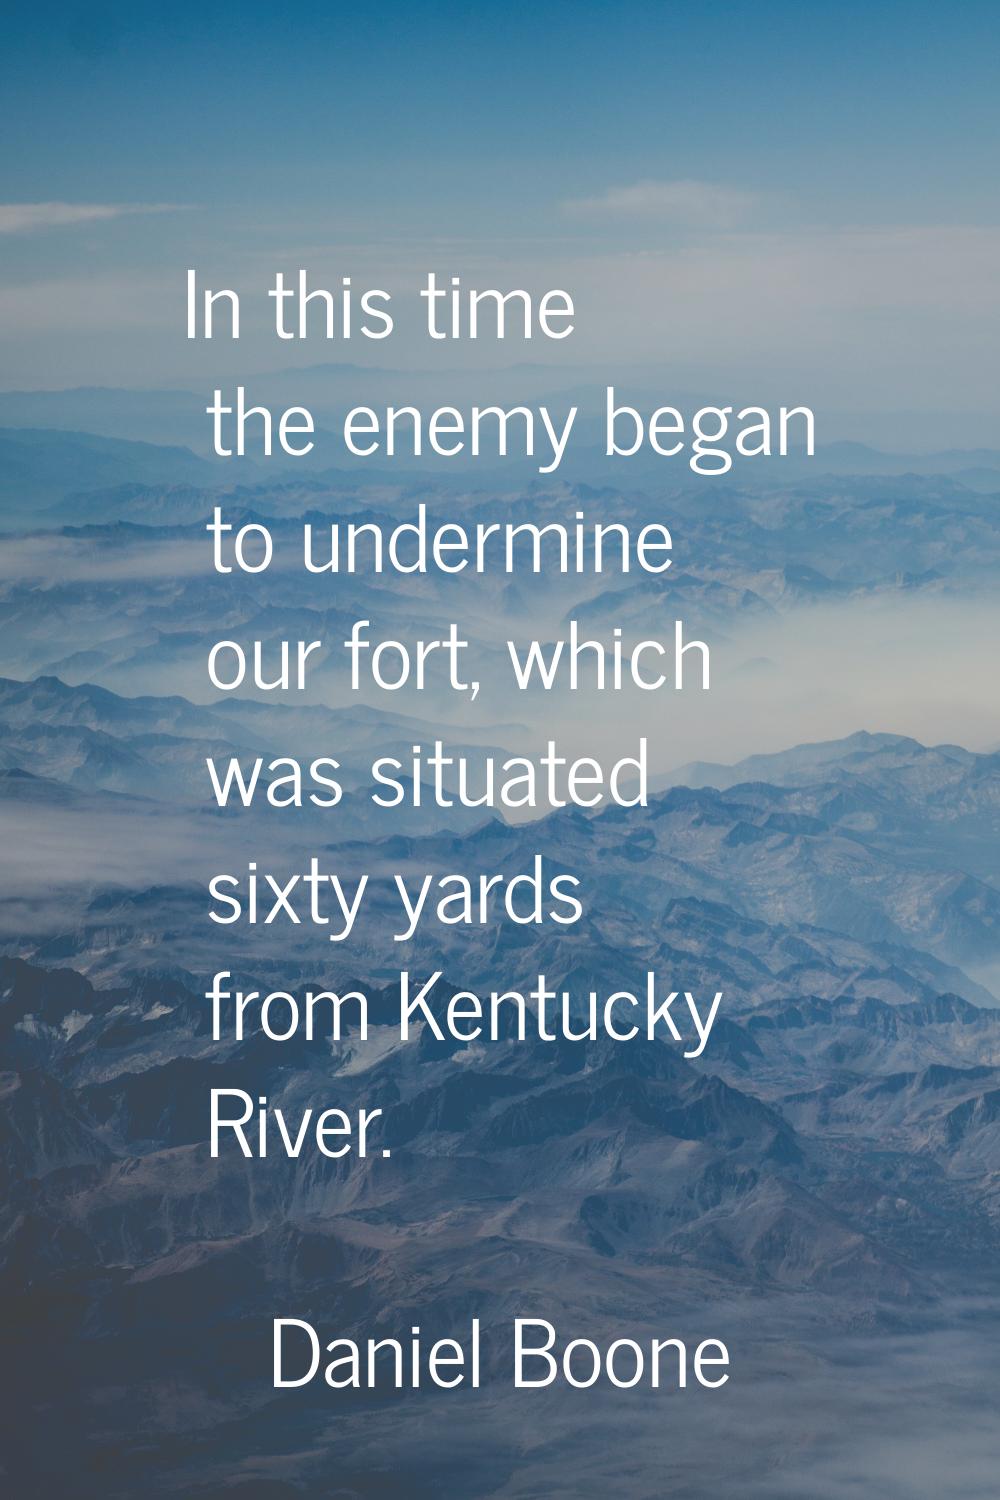 In this time the enemy began to undermine our fort, which was situated sixty yards from Kentucky Ri